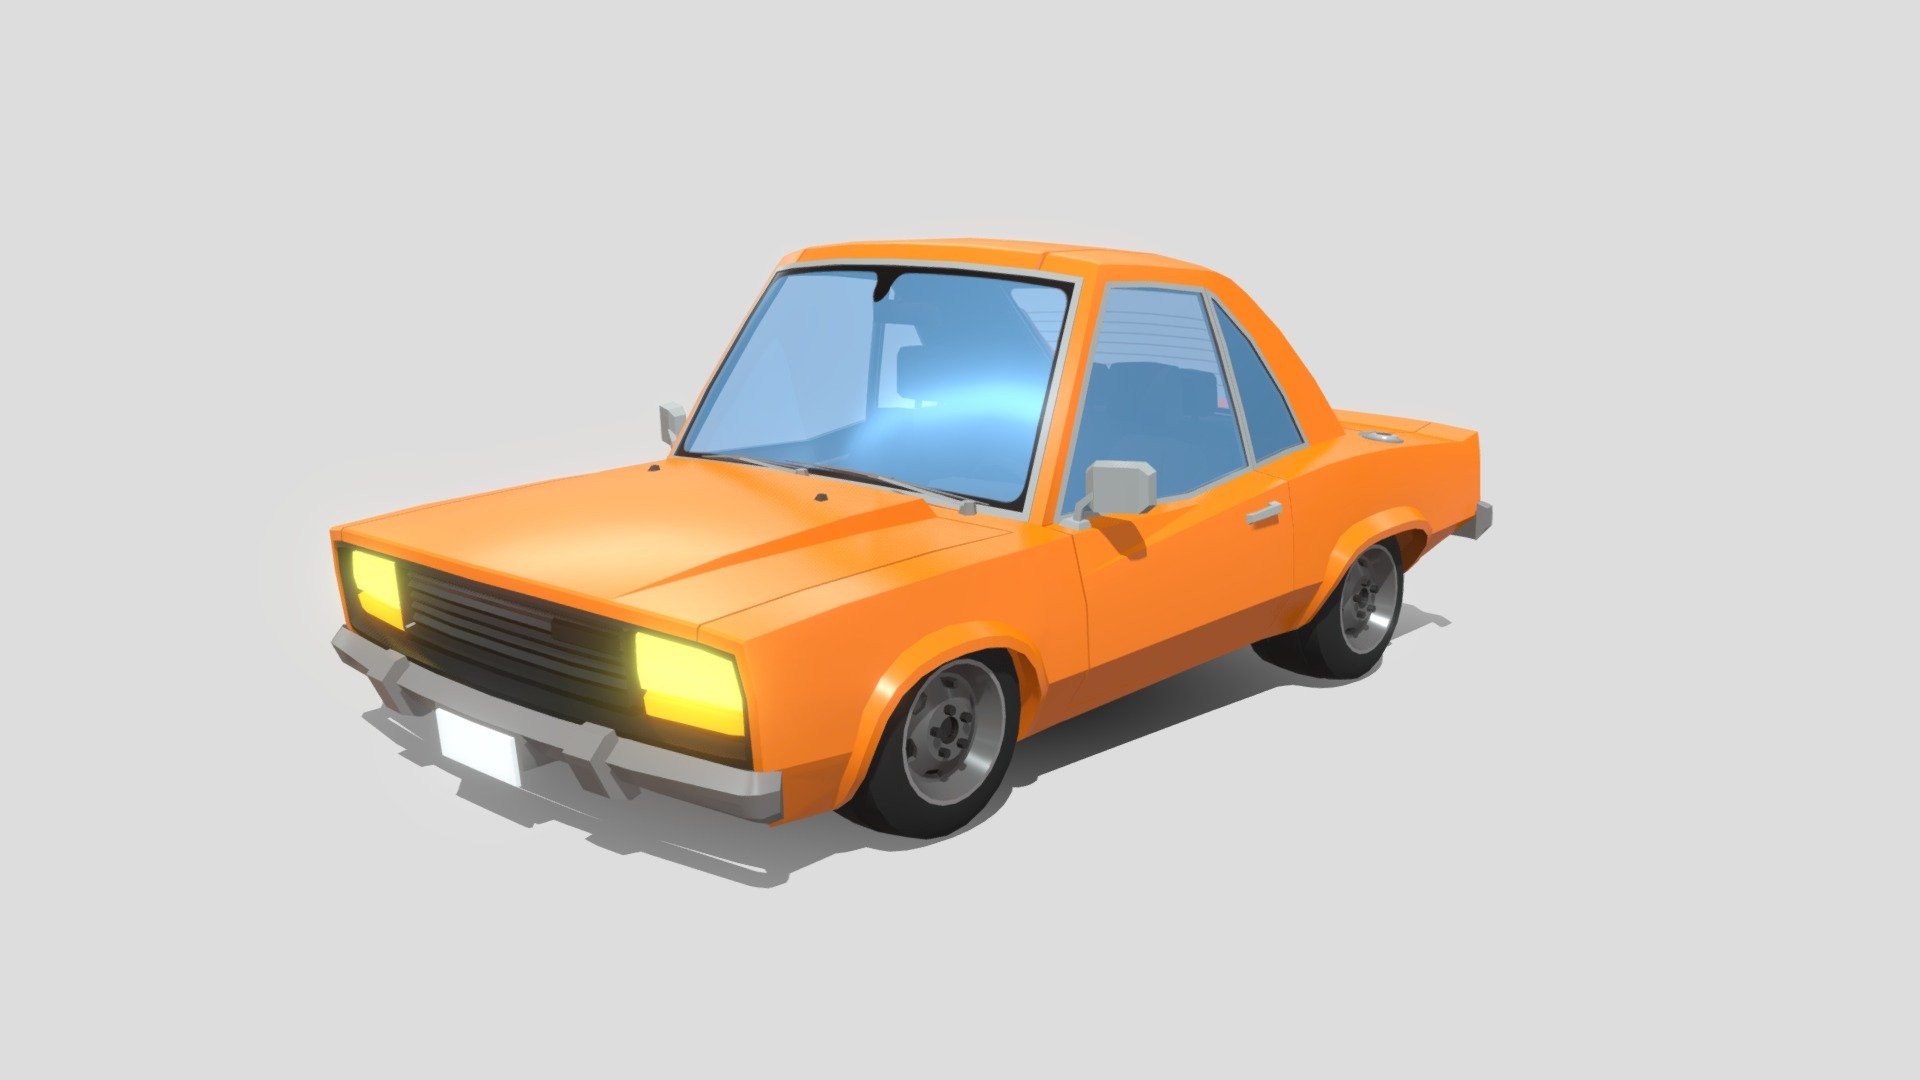 Car for your game or animation. You can disassemble it or blow it up in peaces. Have fun with it!
This model is part of still growing collection:
https://skfb.ly/ozpn9 - Low-poly cartoon style car 02 - Buy Royalty Free 3D model by arturs.vitas 3d model